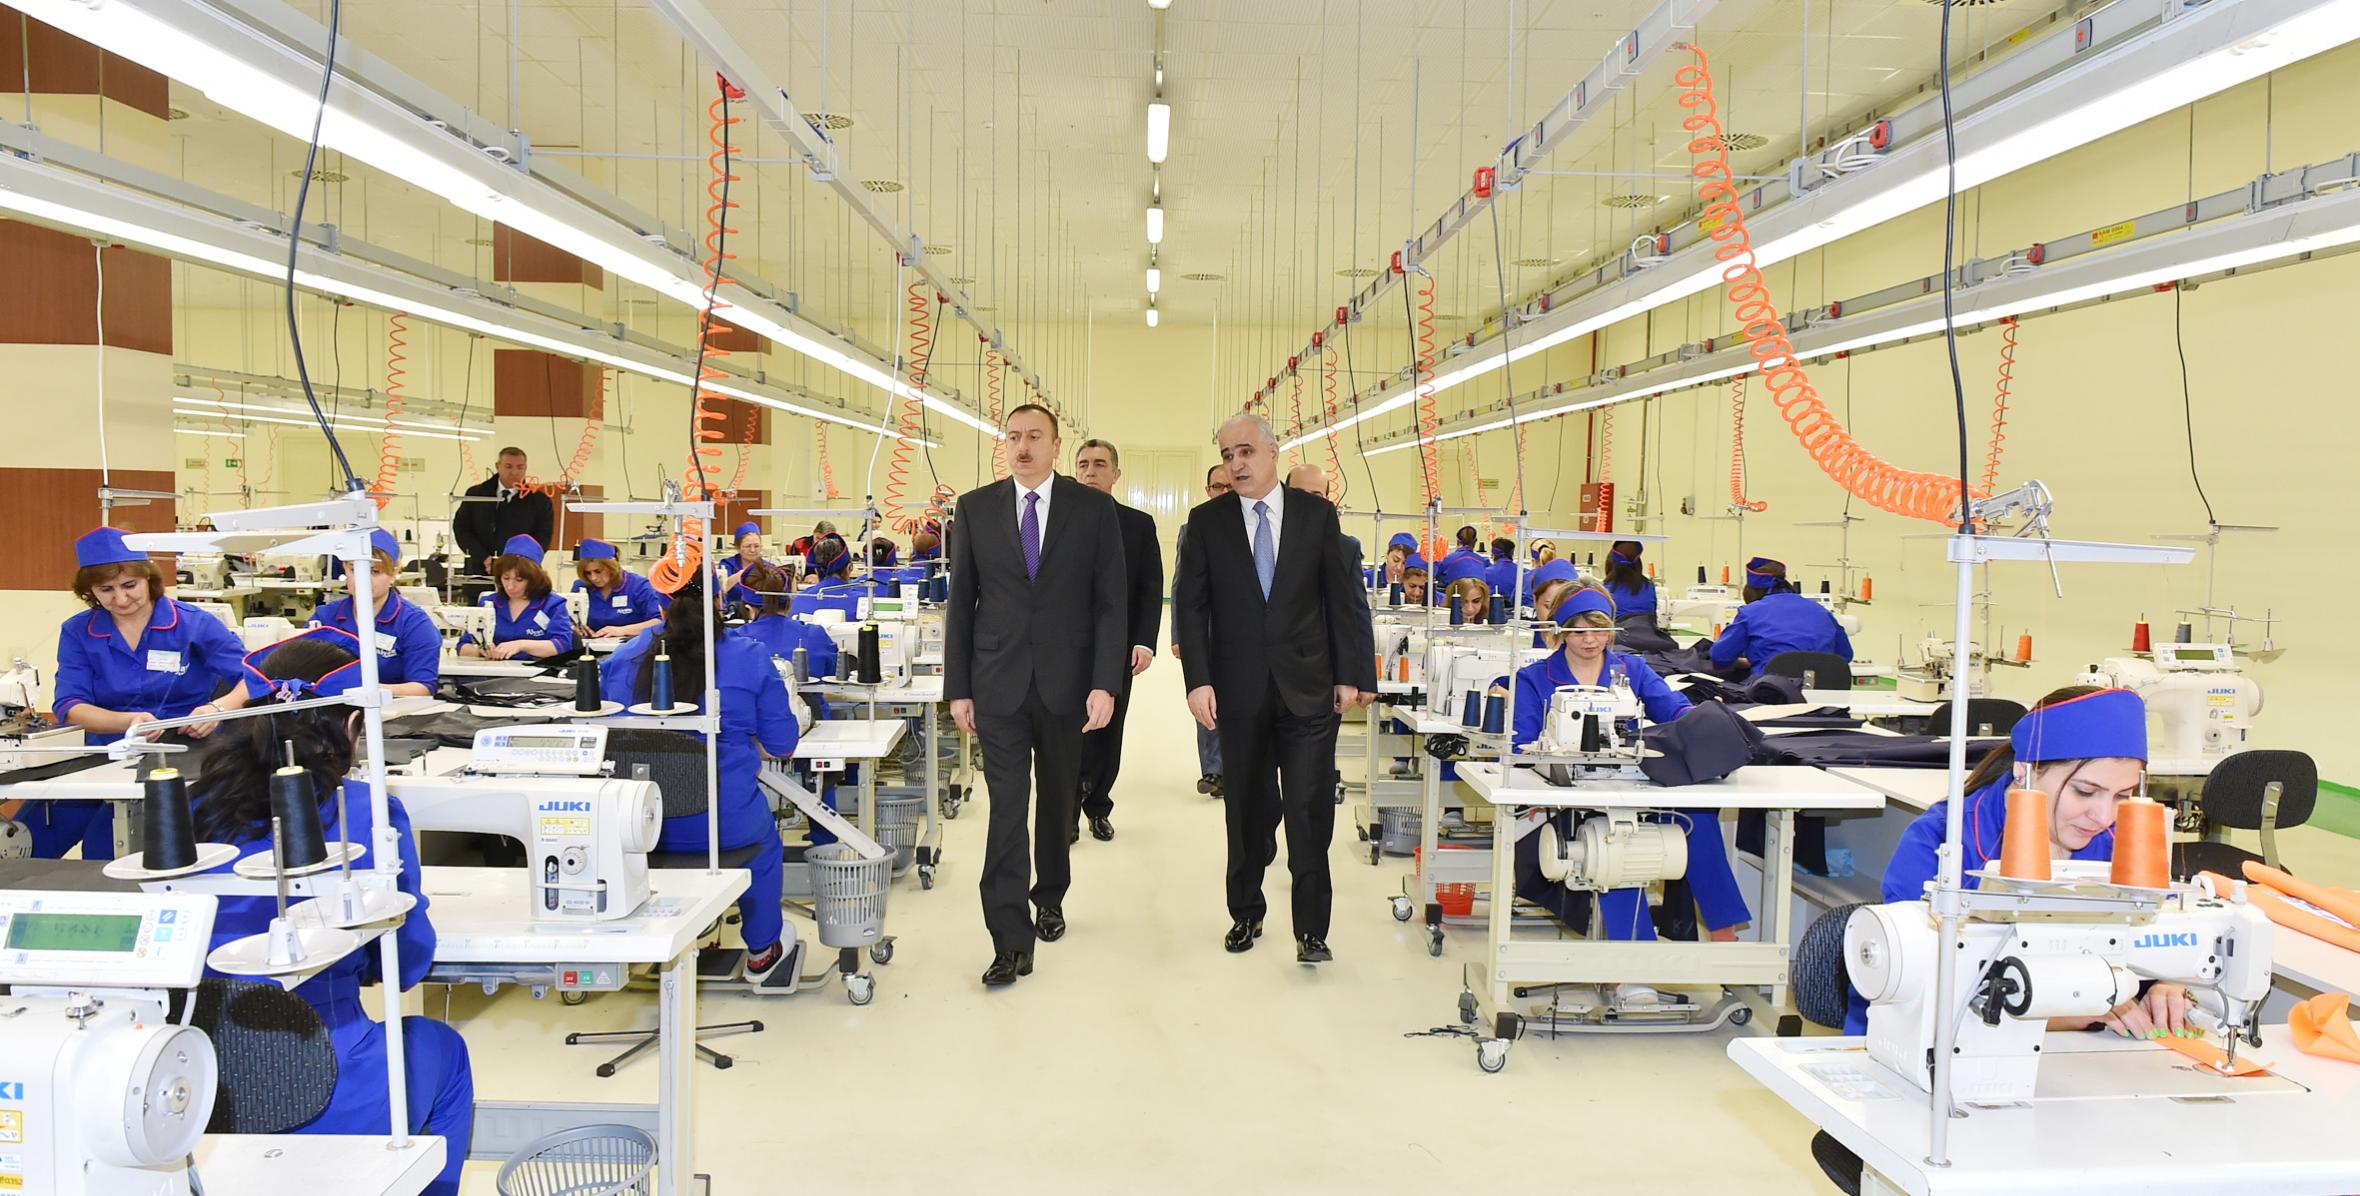 Ilham Aliyev attended the opening of the “Alyans Tekstil” sewing factory in Sumgayit